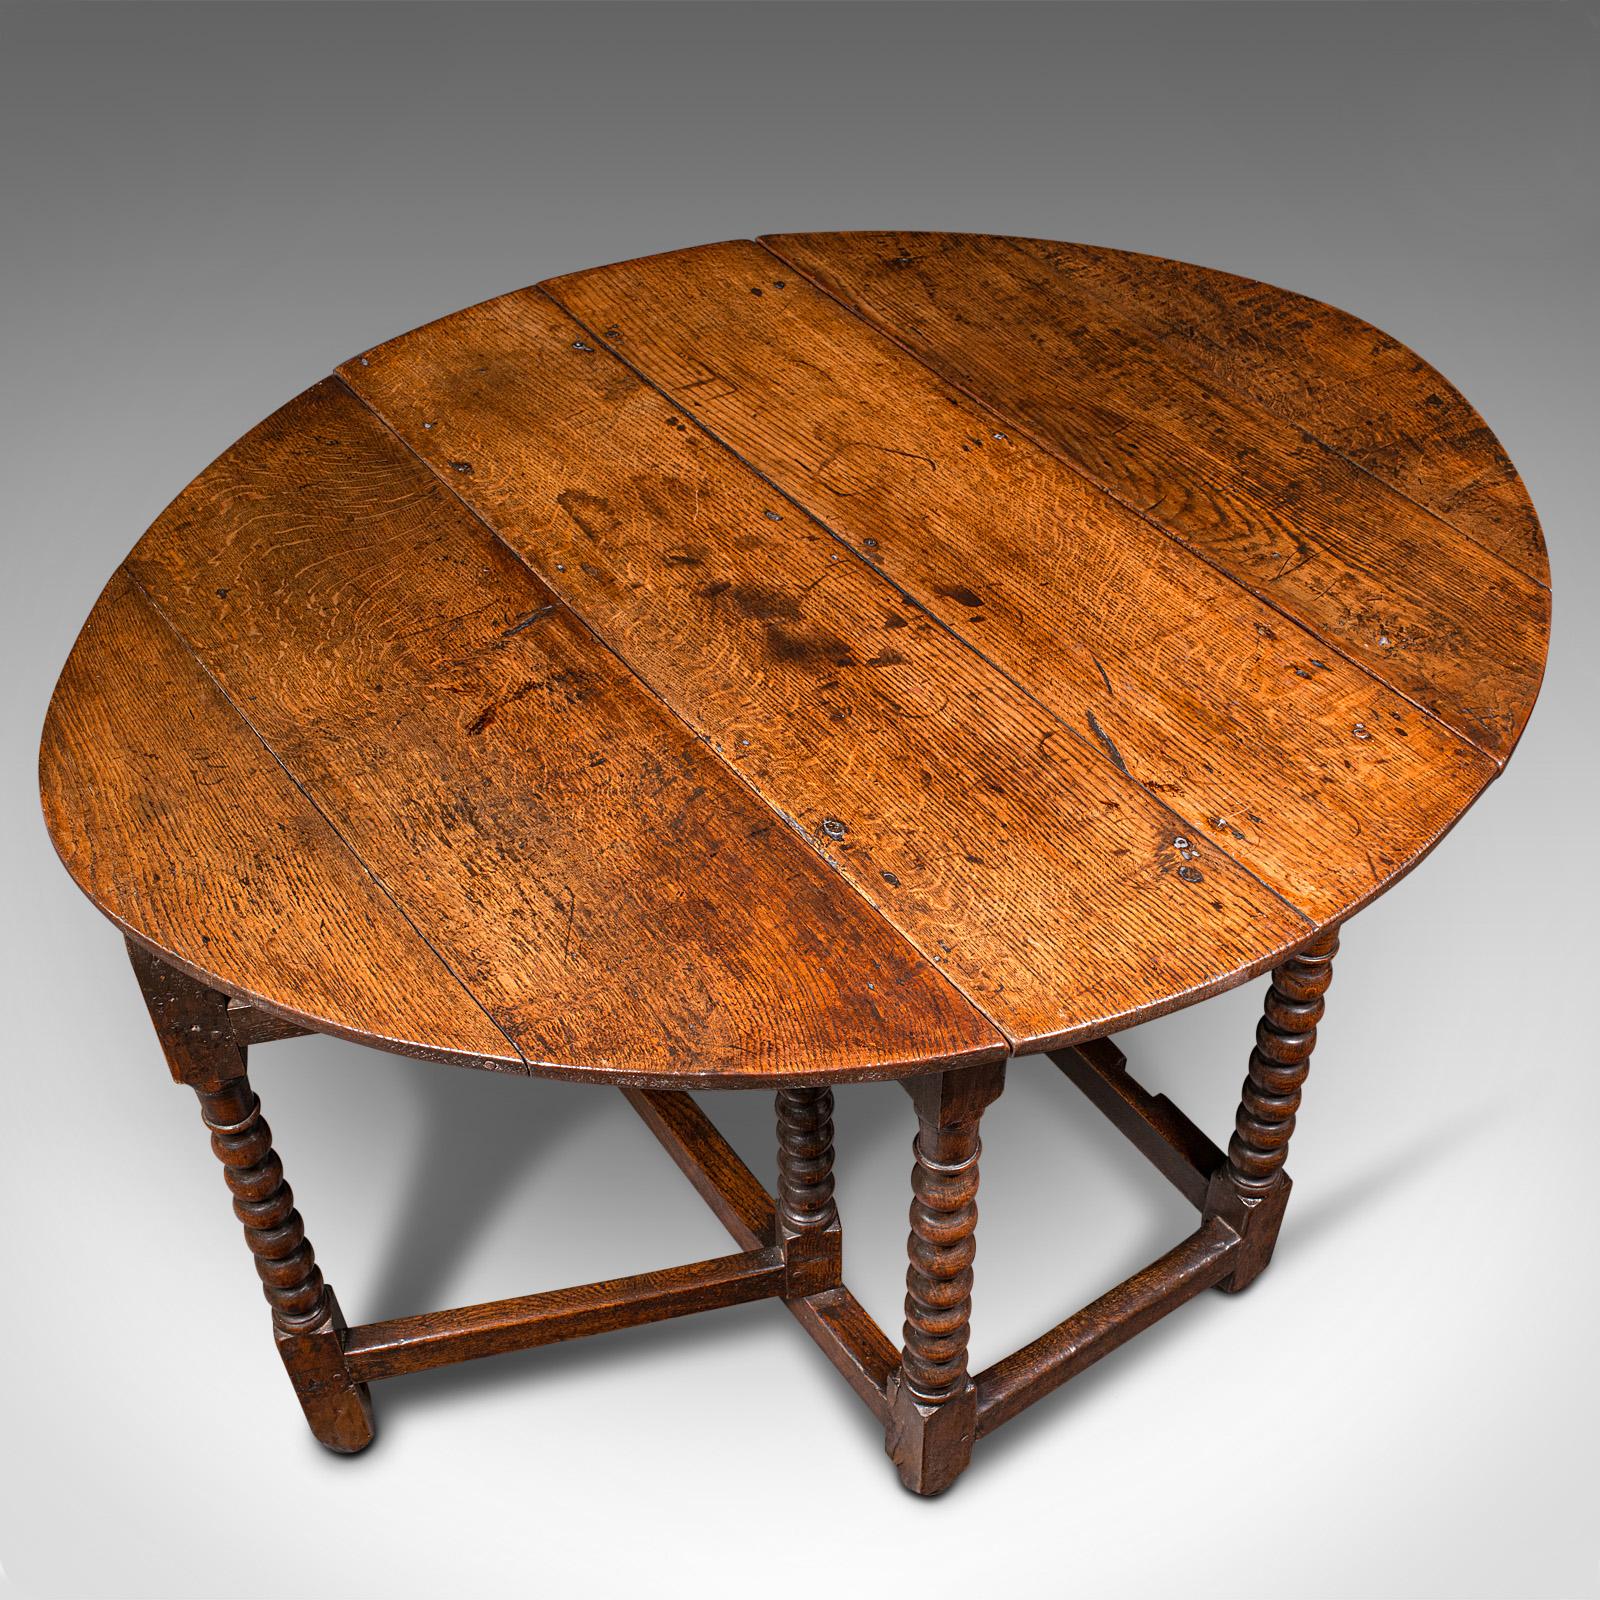 Antique Gate Leg Table, English, Oak, Oval, Extending, Provincial, William III For Sale 2